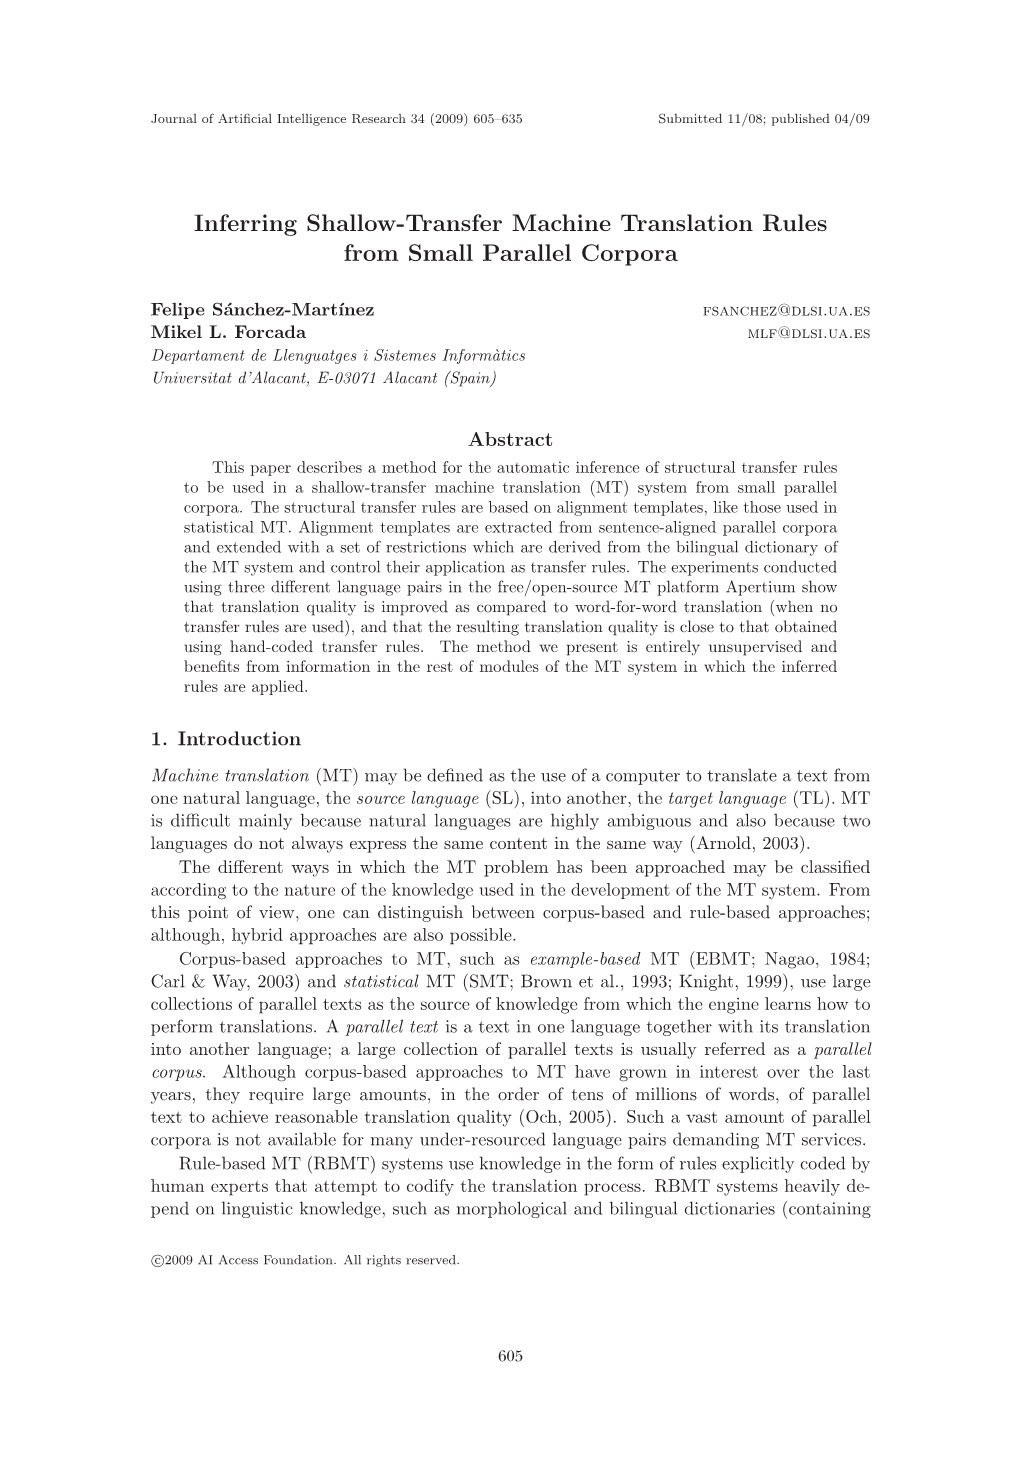 Inferring Shallow-Transfer Machine Translation Rules from Small Parallel Corpora